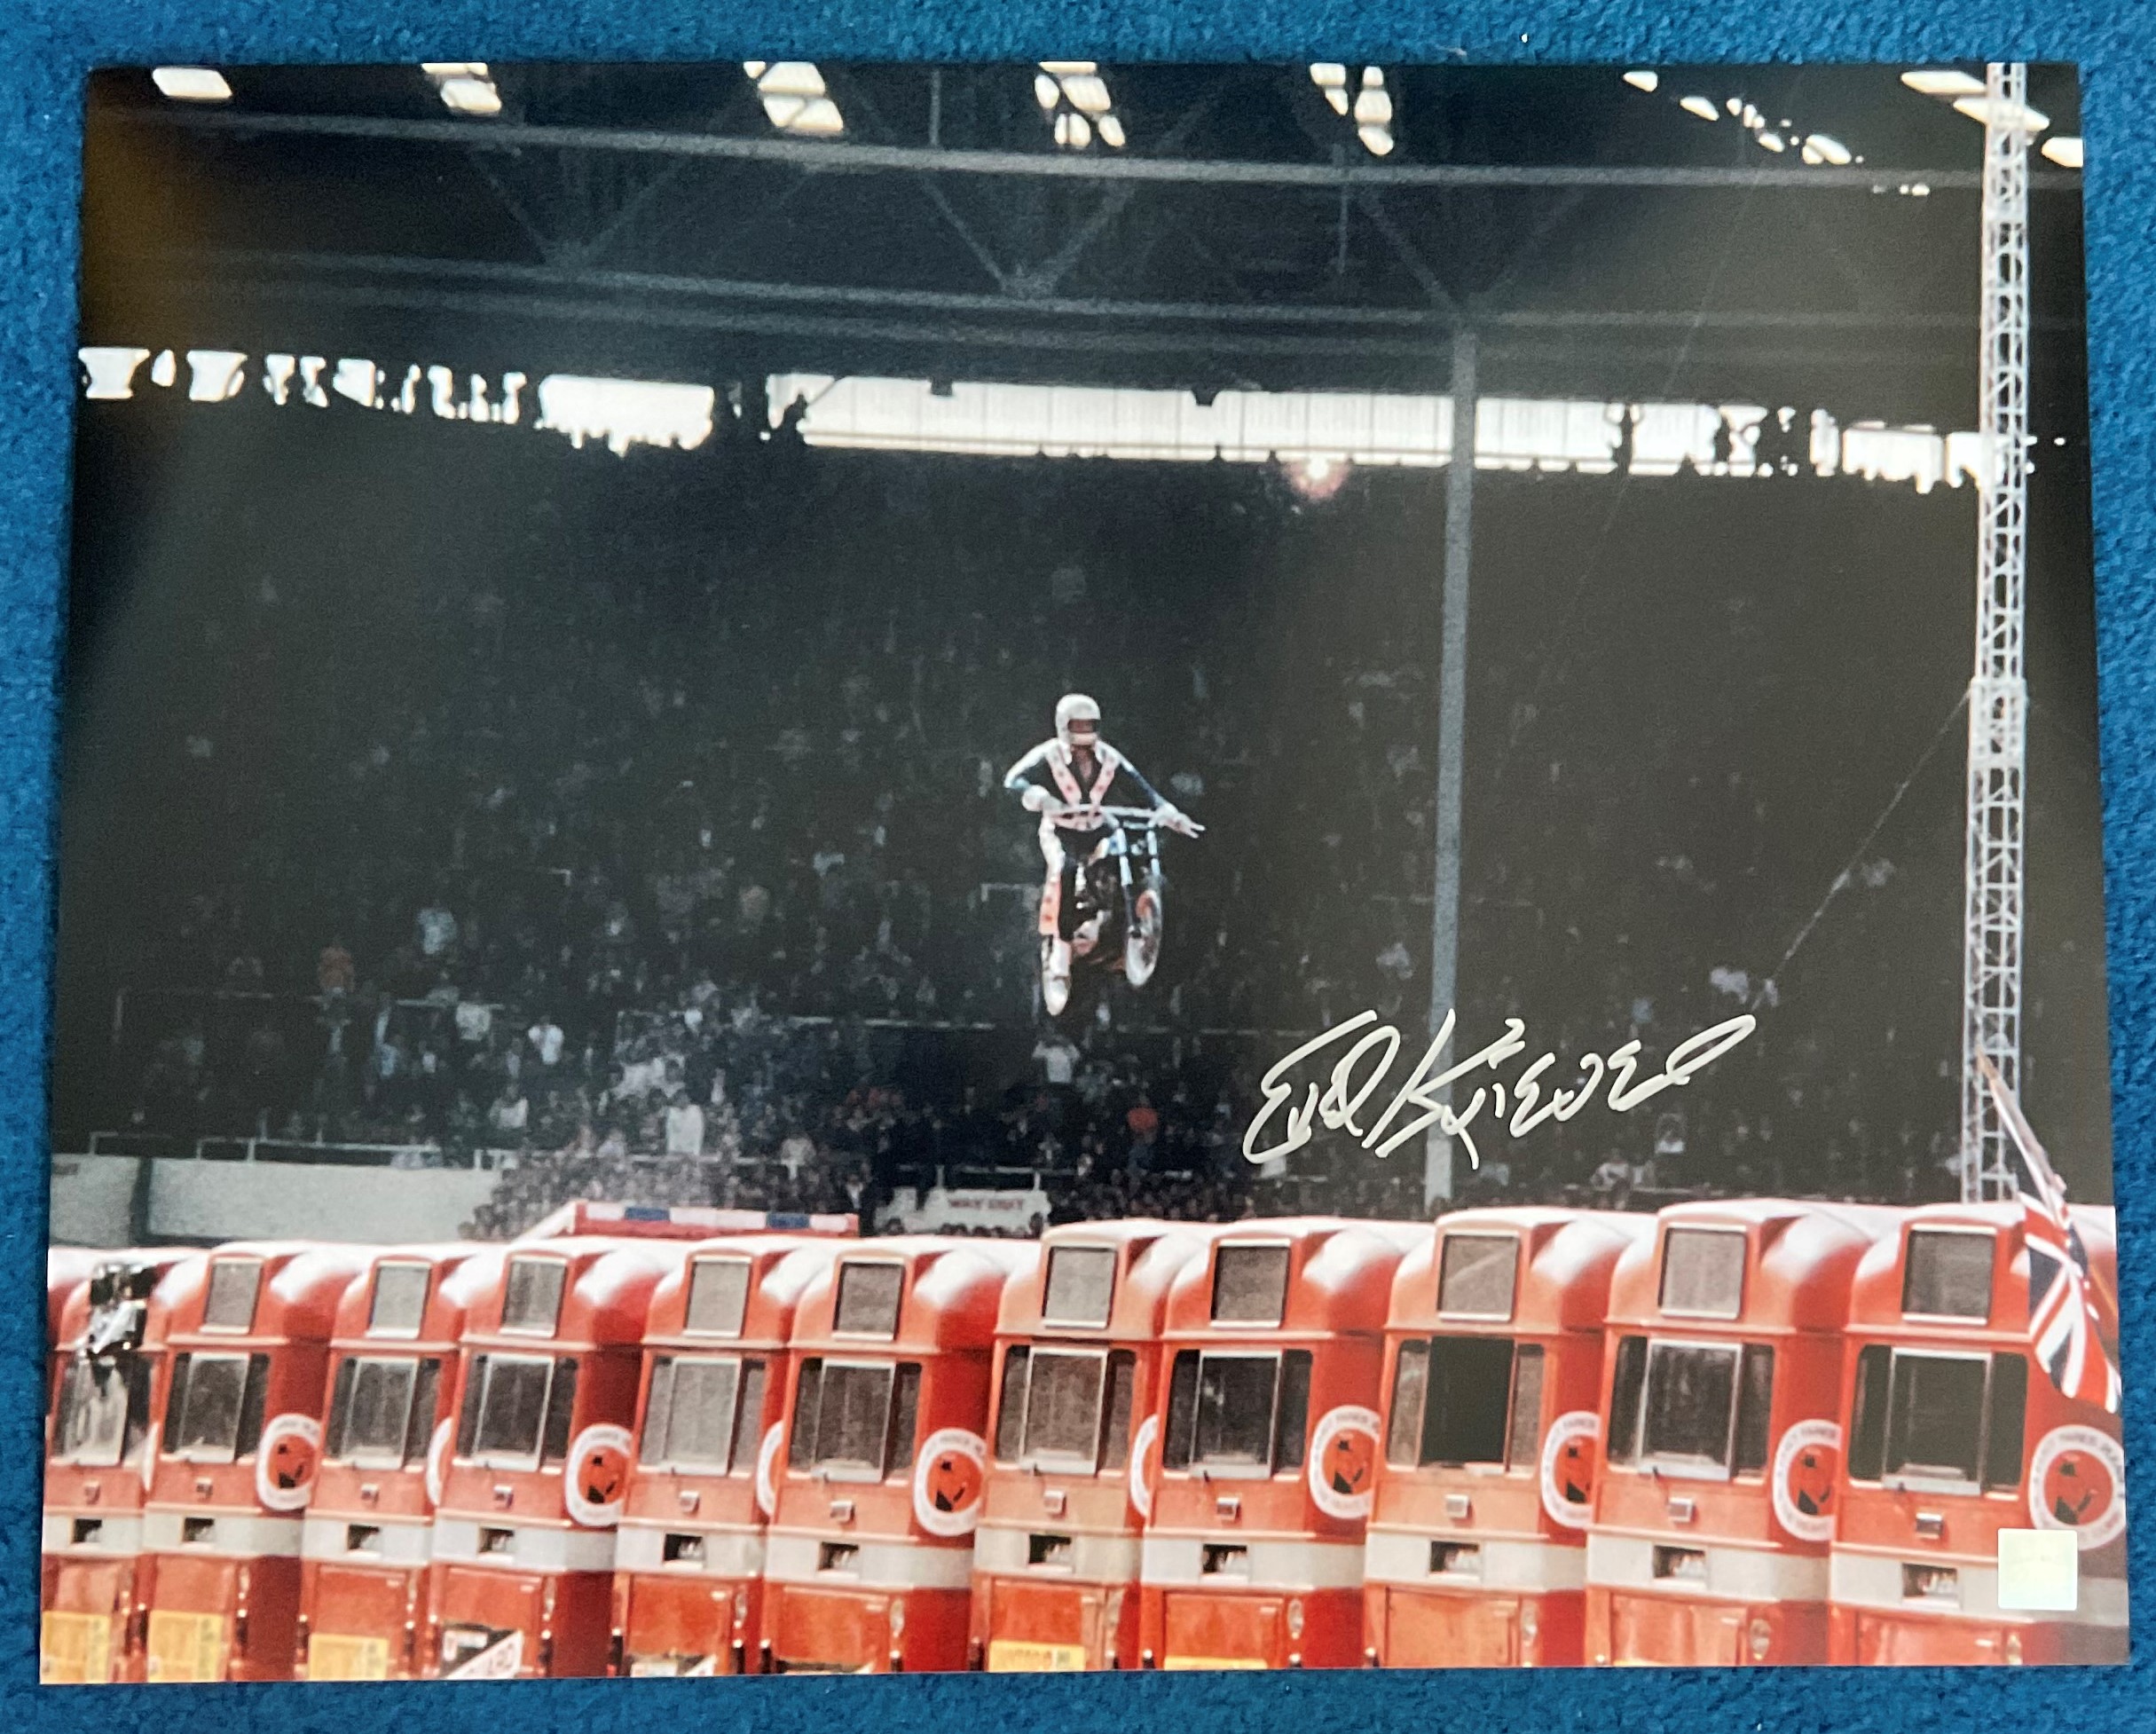 Evel Knievel 20x16 signed colour photo fantastic image of the legendary stuntman in mid-air during